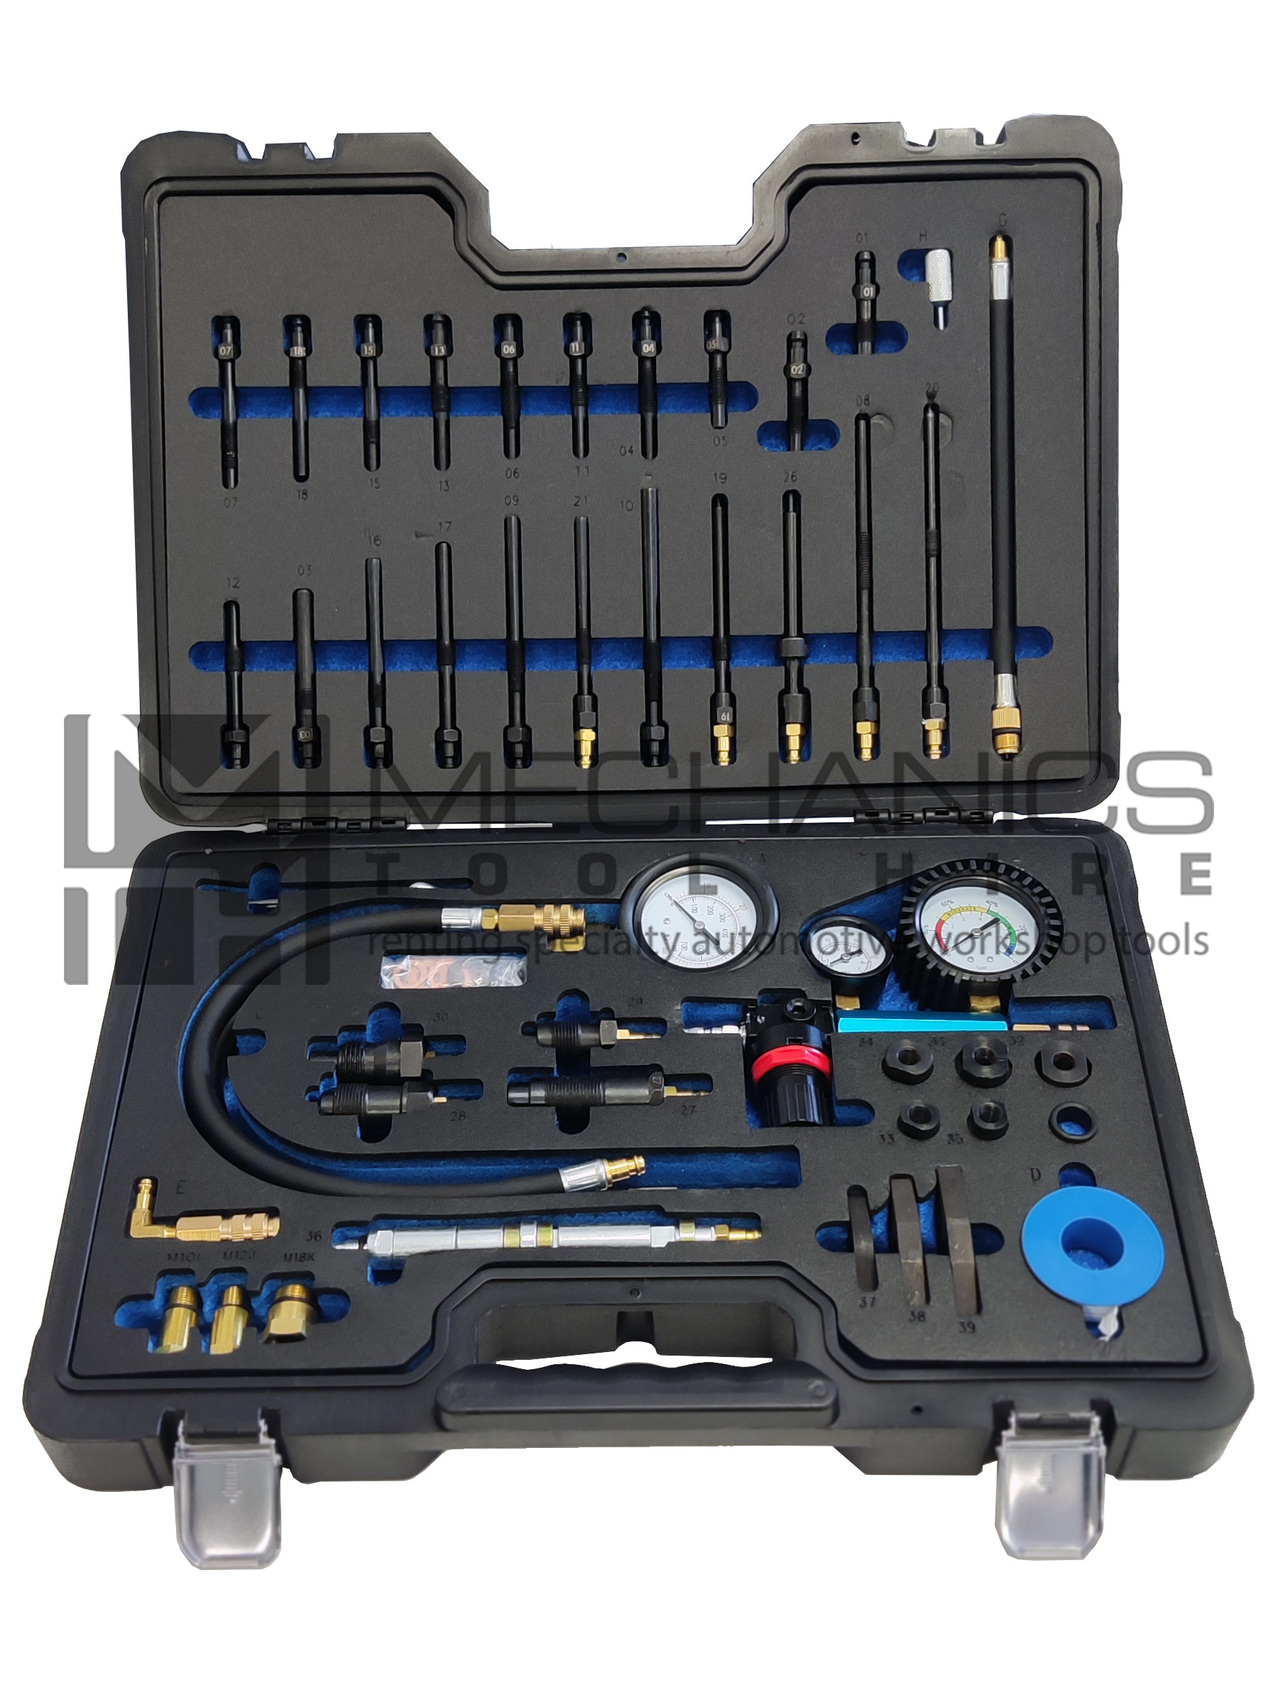 OUKANING Diesel Engine Compression Tester Cylinder Leakage Detector with 9 Different Glow Plugs and 4 Injector Adaptors 